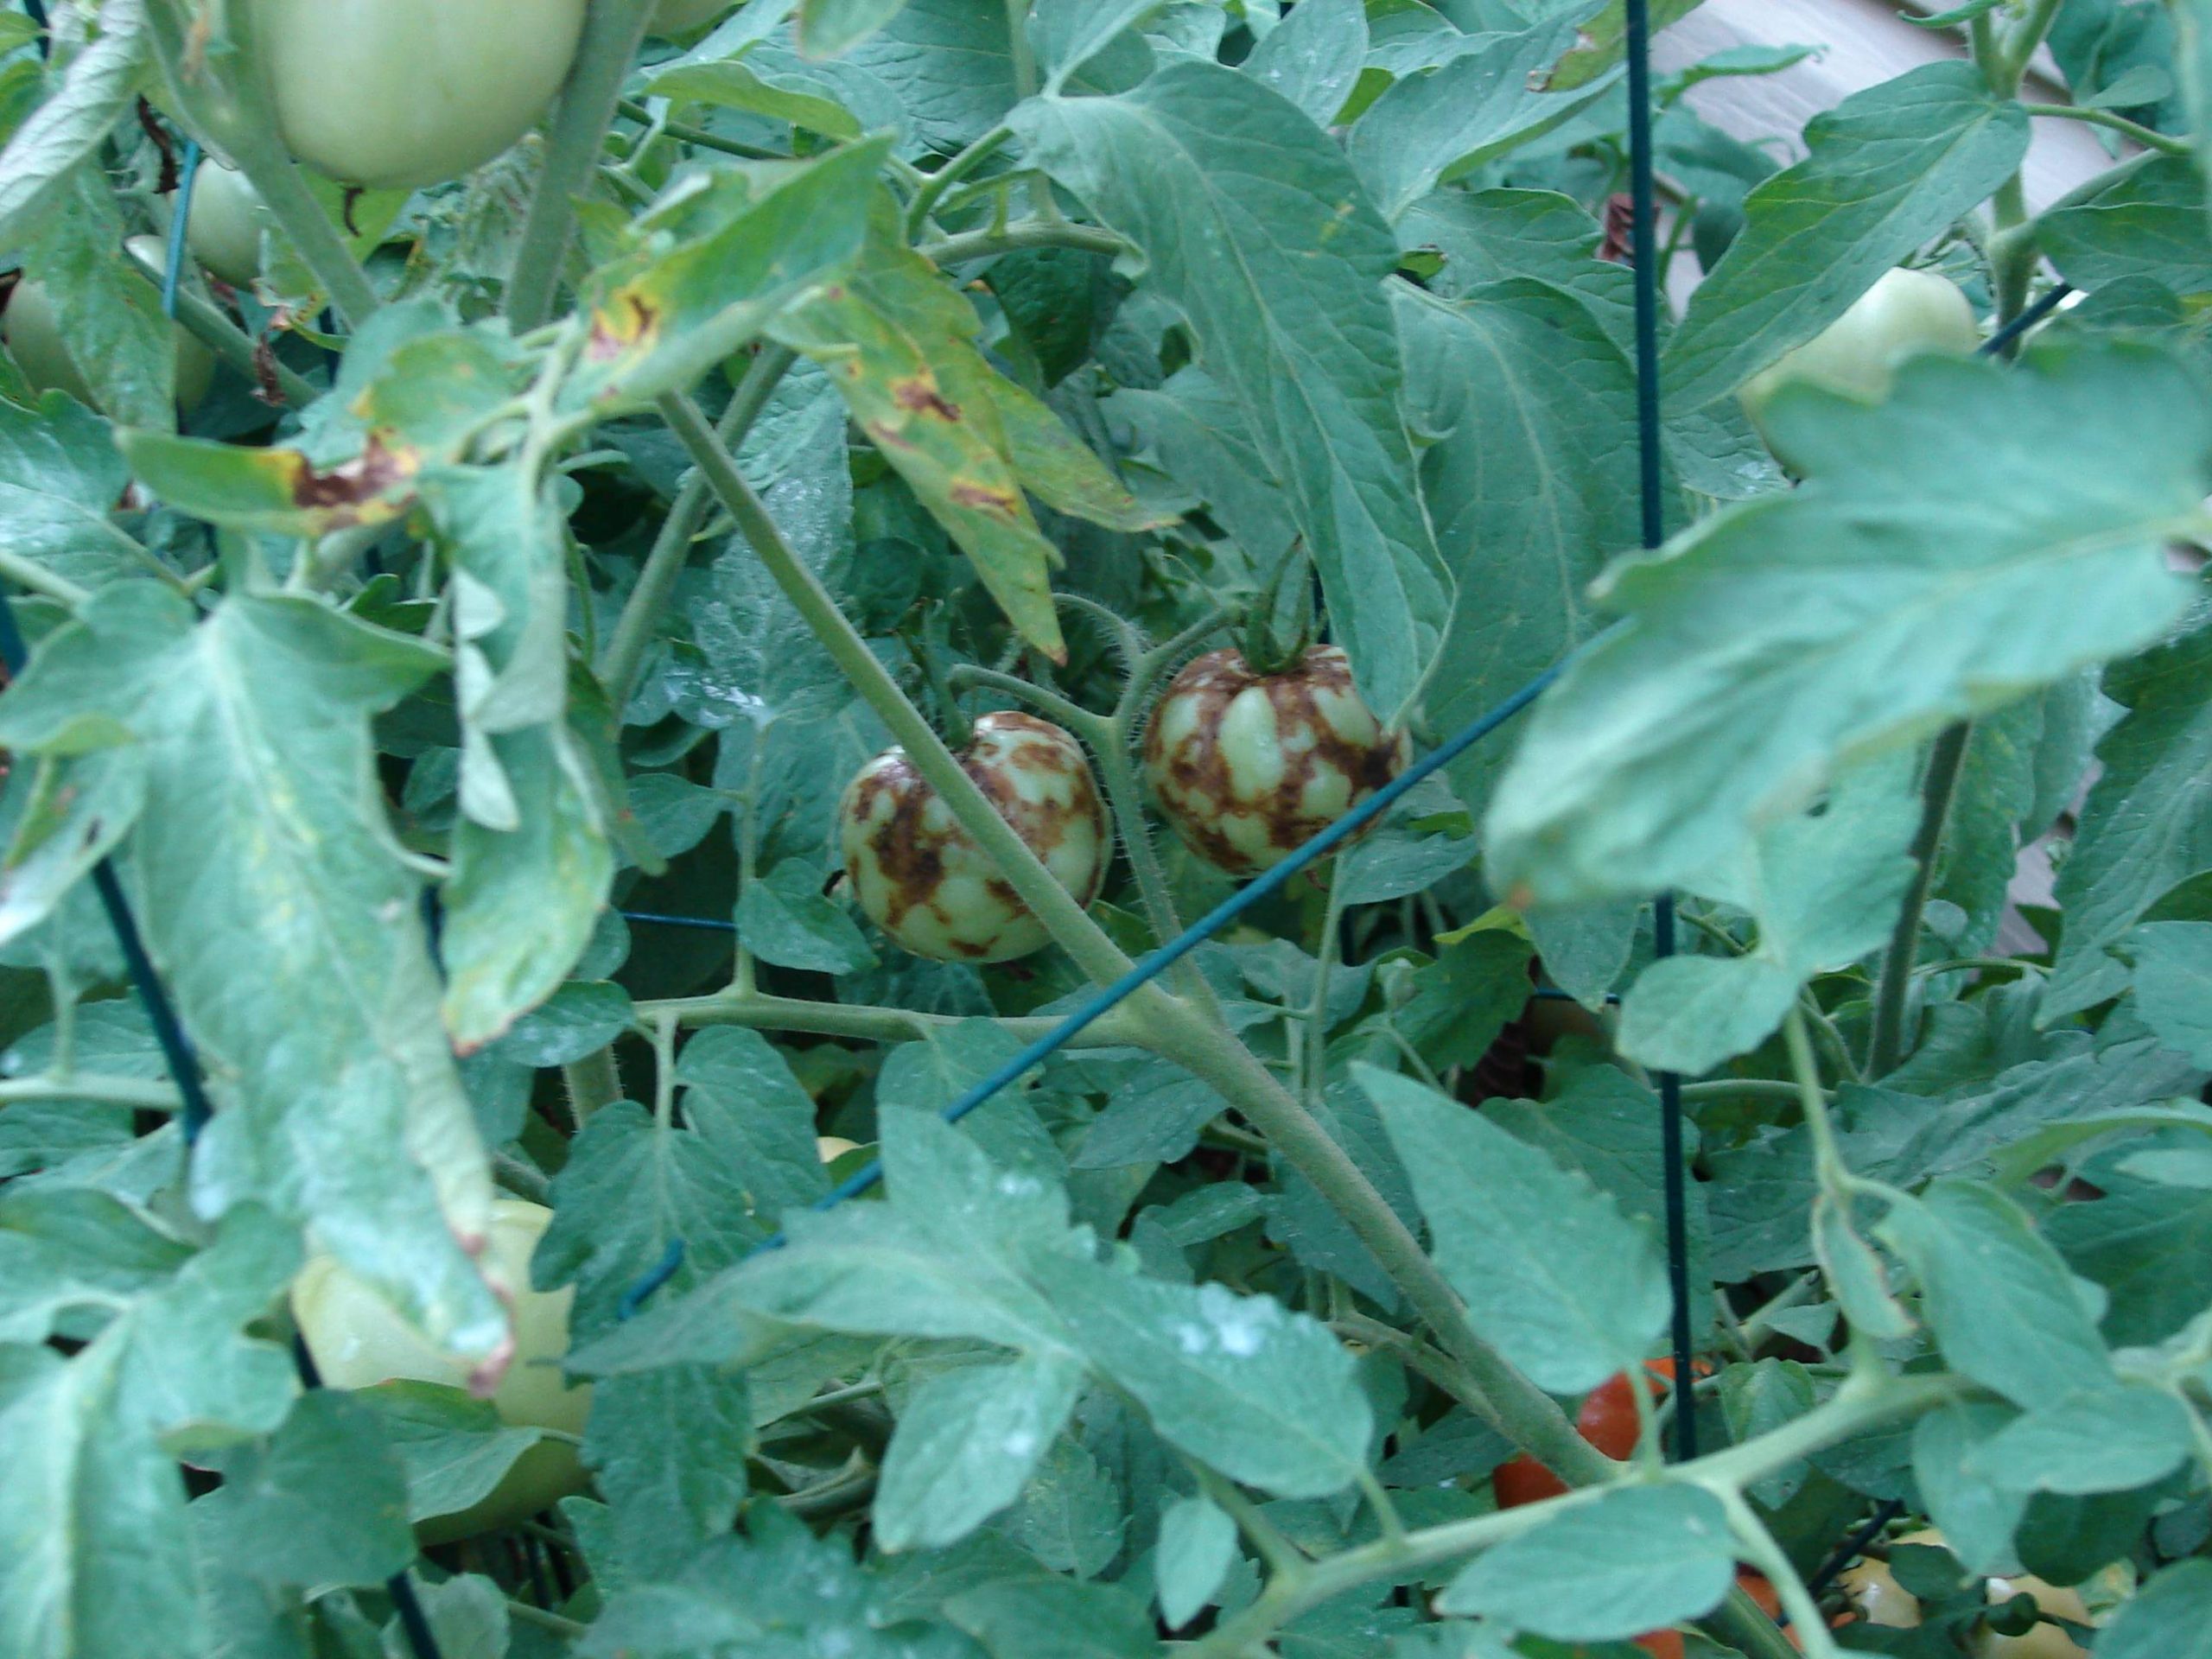 tomato spotted wilt virus 1 don't know source